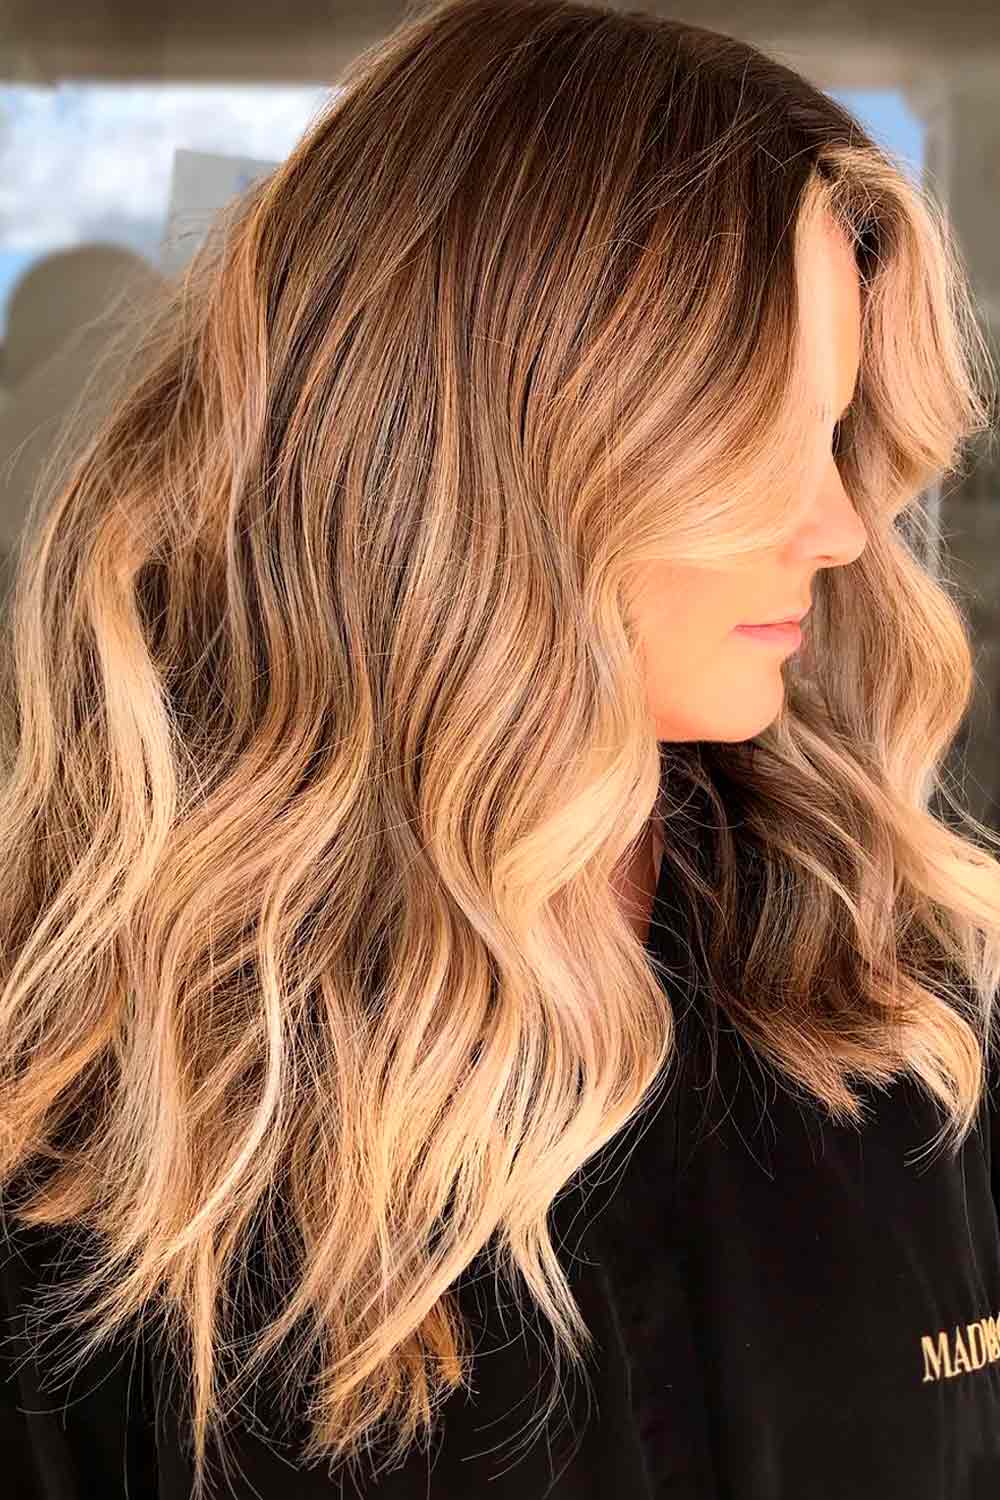 Bronde Balayage with Money Pieces Hairstyles #mediumhairbalayage #balayagehairstyles #mediumhair #balayage